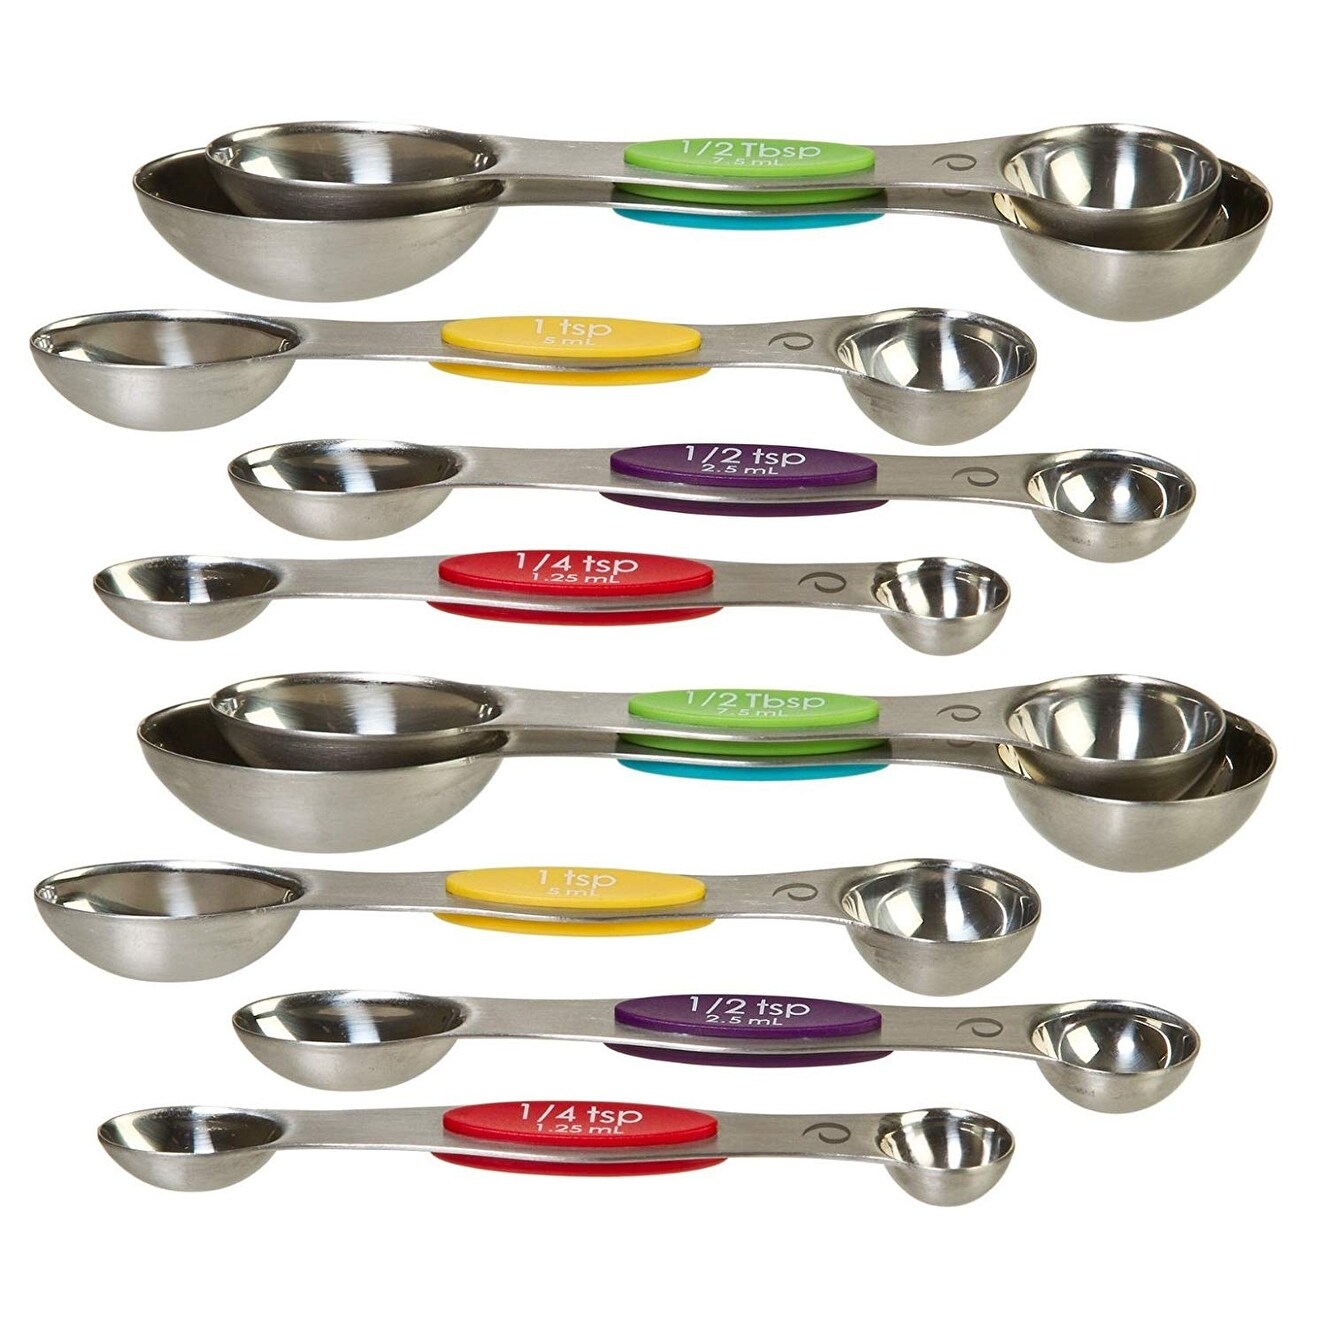 https://ak1.ostkcdn.com/images/products/is/images/direct/13c354f3bcb369bab666e2ce951187c8c8e93963/Prepworks-by-Progressive-Snap-Fit-Measuring-Spoons%2C-Stainless-Steel%2C-Set-of-5.jpg